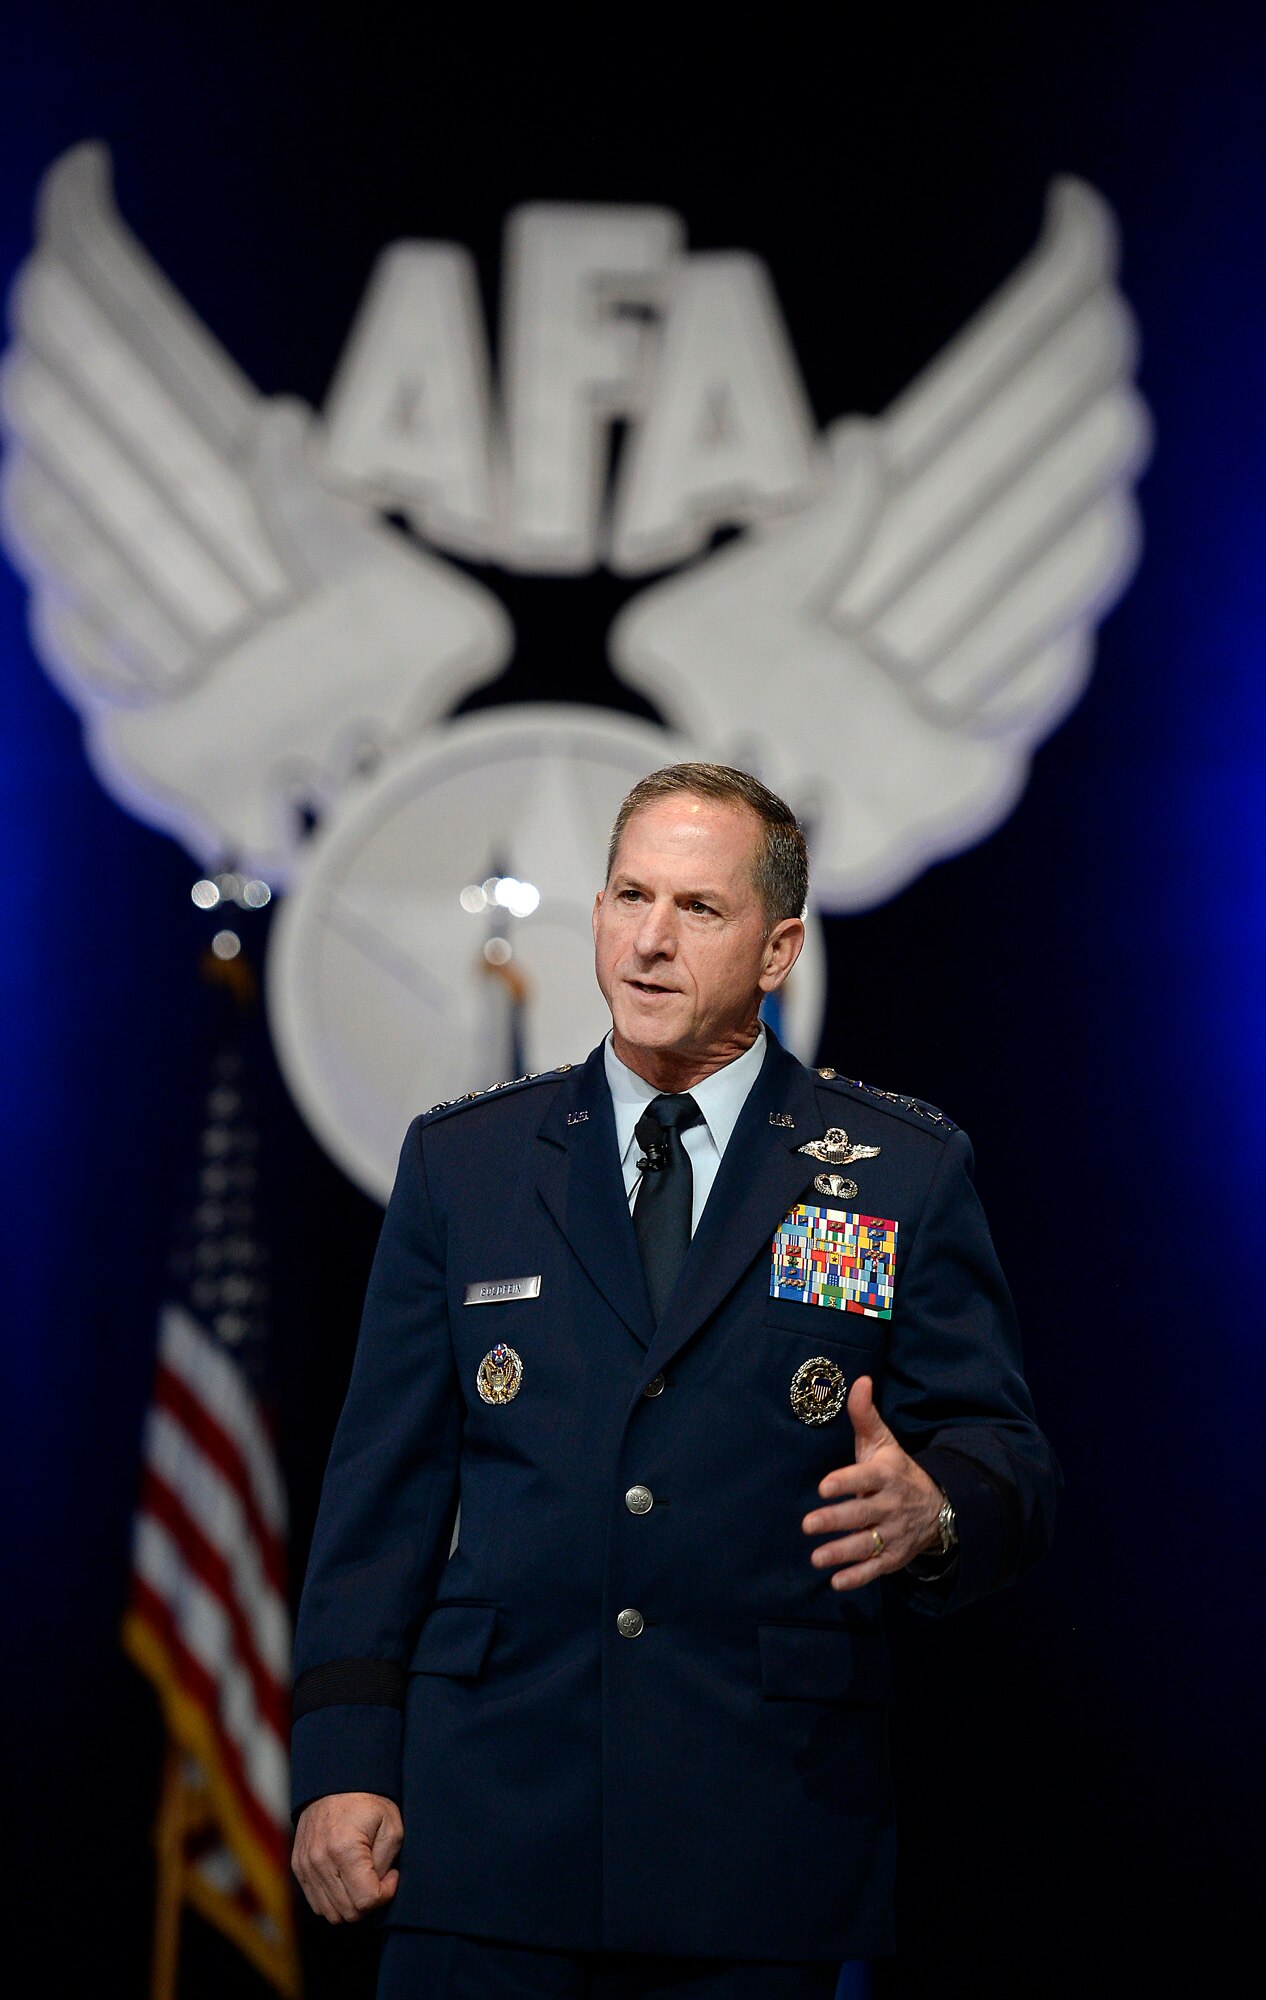 Air Force Chief of Staff Gen. Dave Goldfein gives his first "Air Force Update," during the Air Force Association's Air, Space and Cyber Conference in National Harbor, Md., Sept. 20, 2016. The 21st chief of staff announced his three focus areas: to revitalize squadrons, develop joint leaders and teams, and improve command and control. (U.S. Air Force photo/Scott M. Ash)  